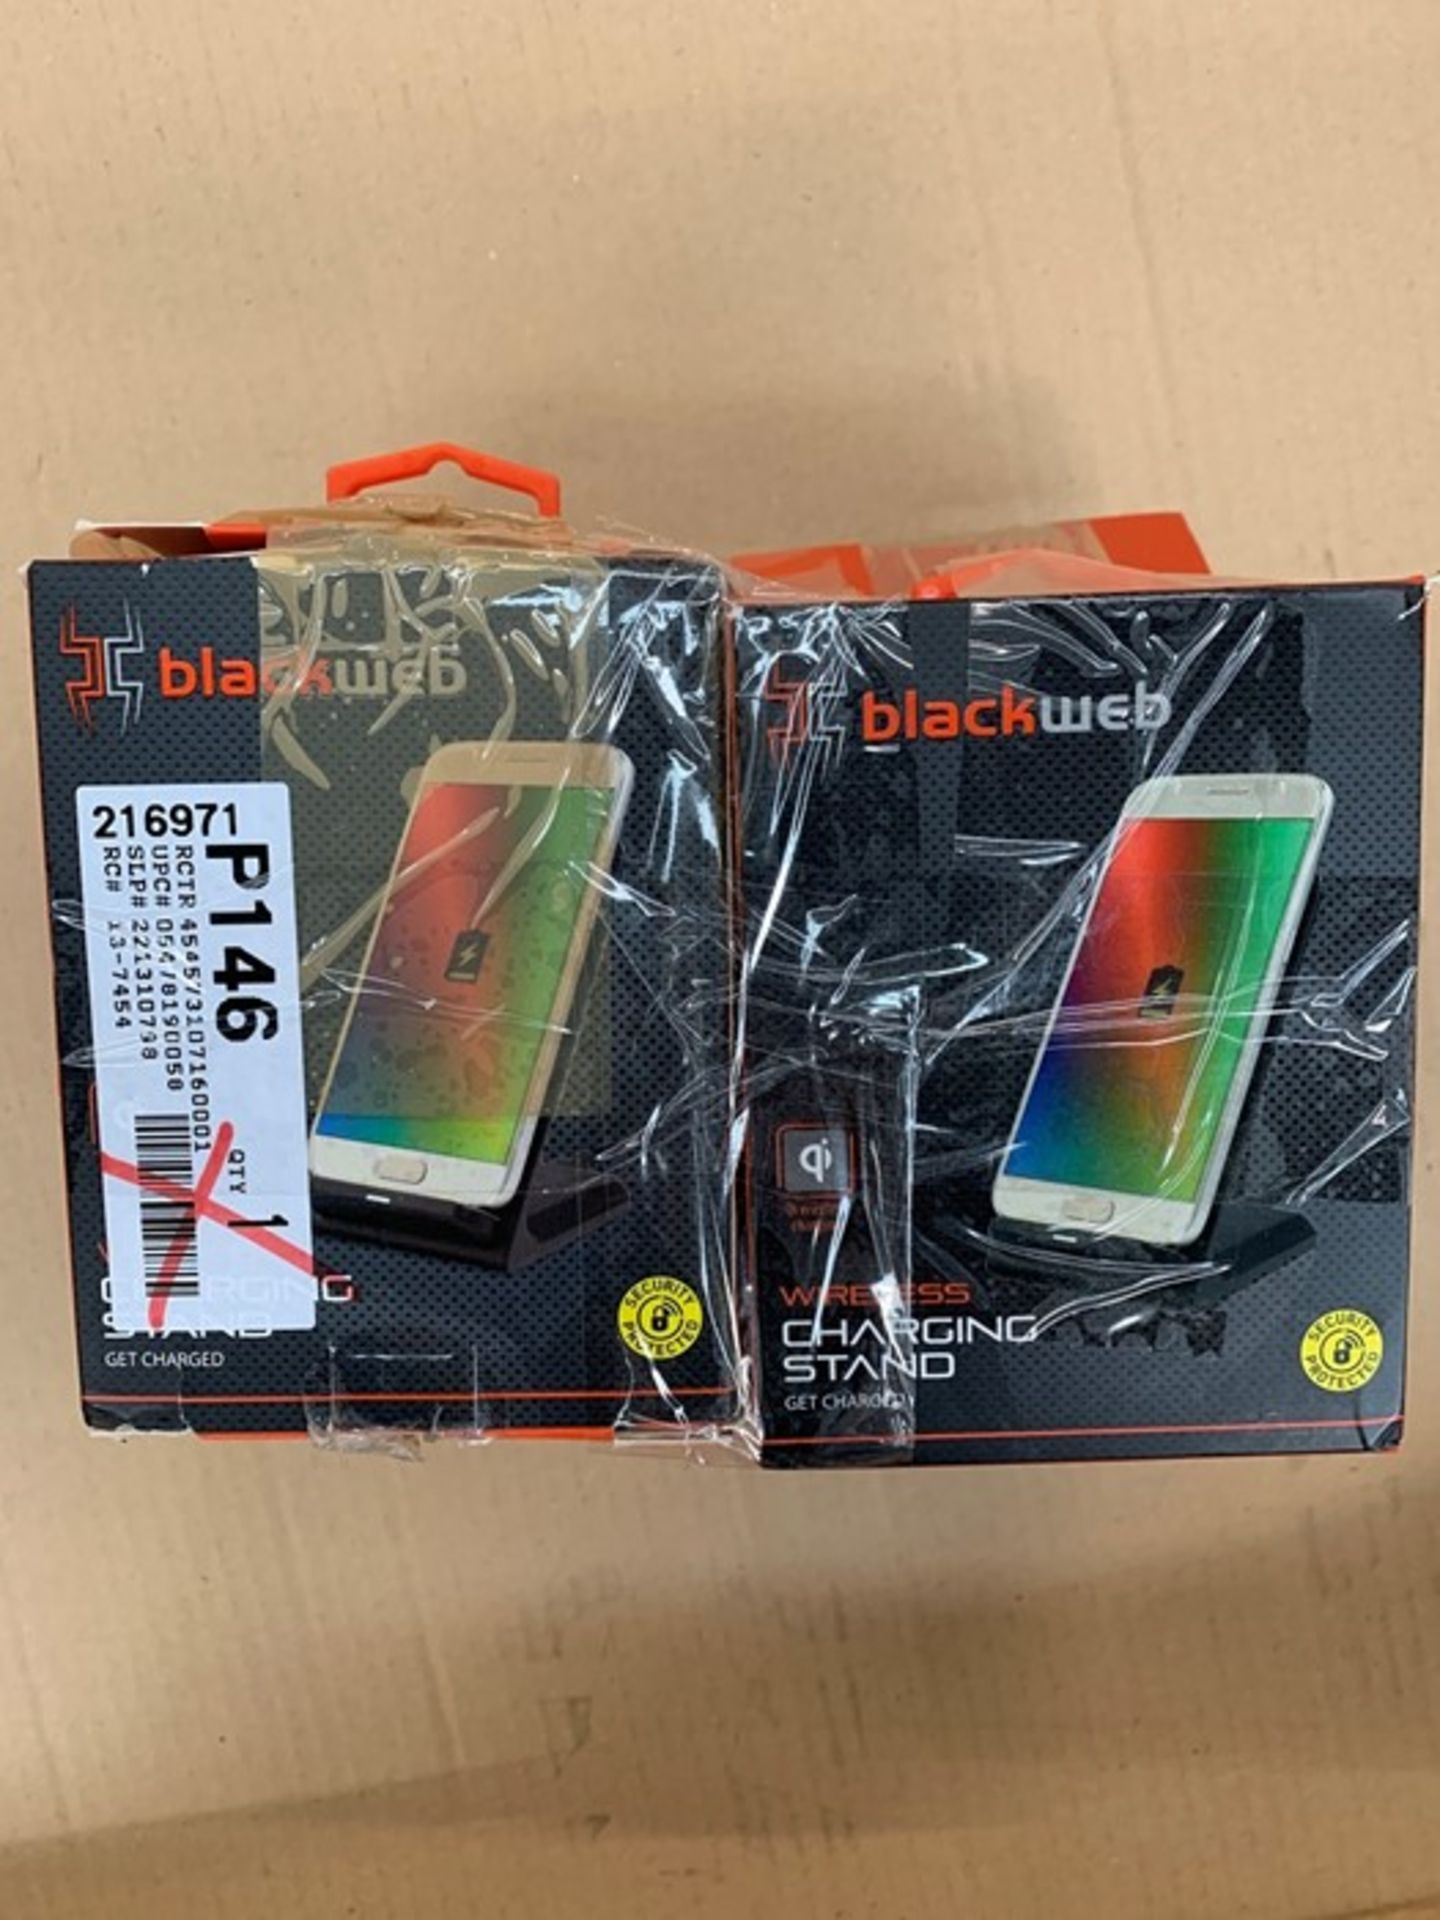 4 BOXED BLACKWEB WIRELESS CHARGING STANDS / BL - 6971 (PUBLIC VIEWING AVAILABLE)